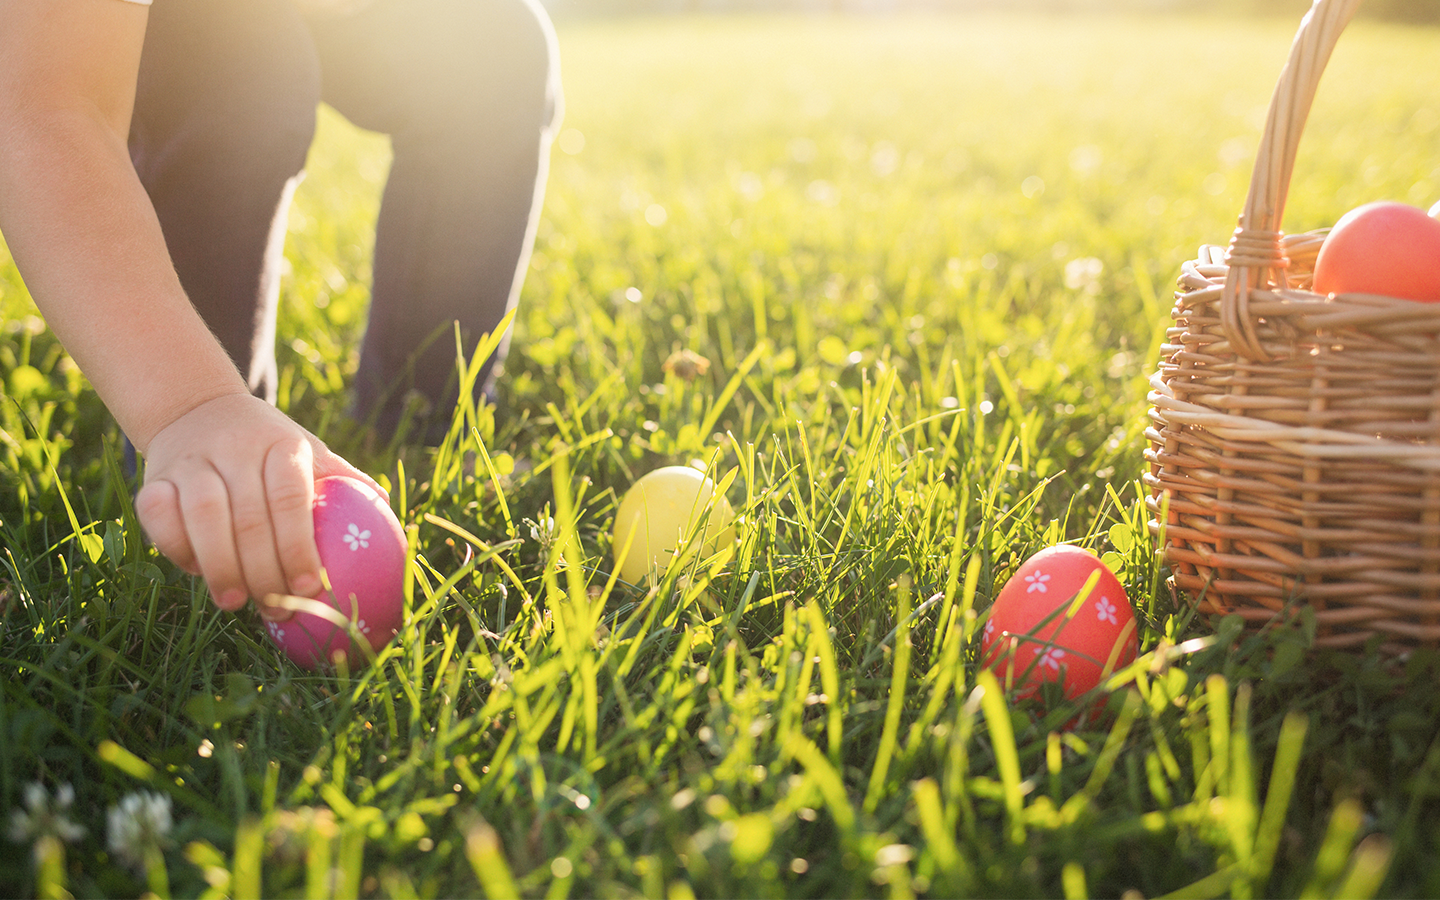 10 Healthy things to include in your Easter stuffer basket